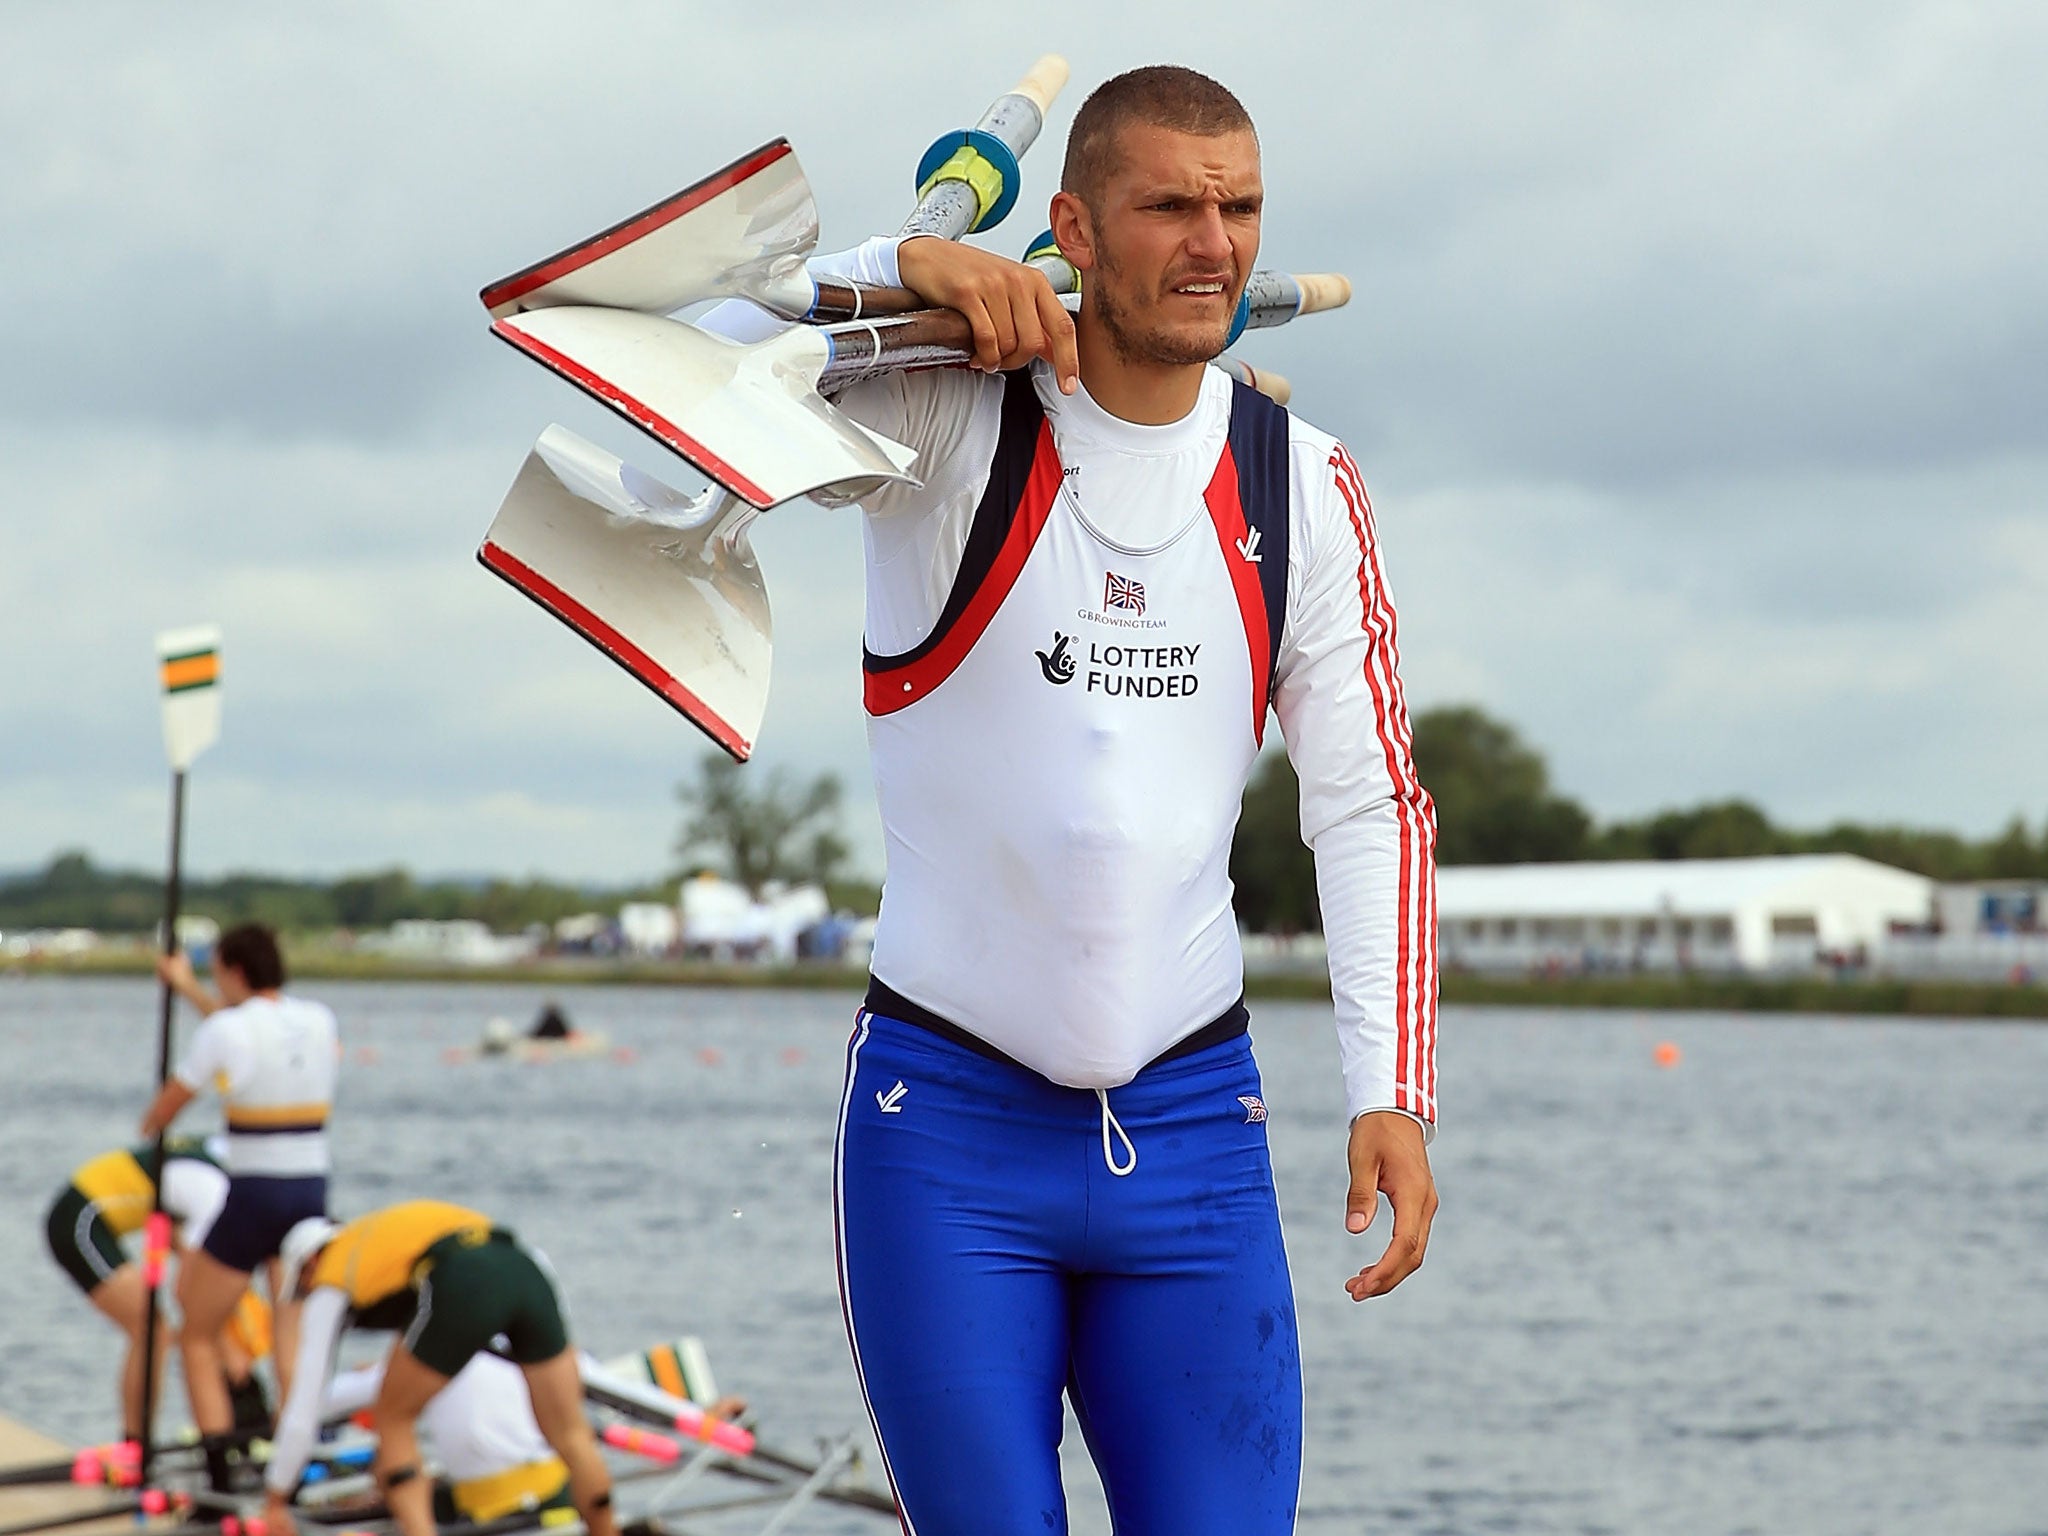 At Rio, Moe Sbihi is in contention for Britain’s coxless four boat – which has taken gold at the previous four Olympics